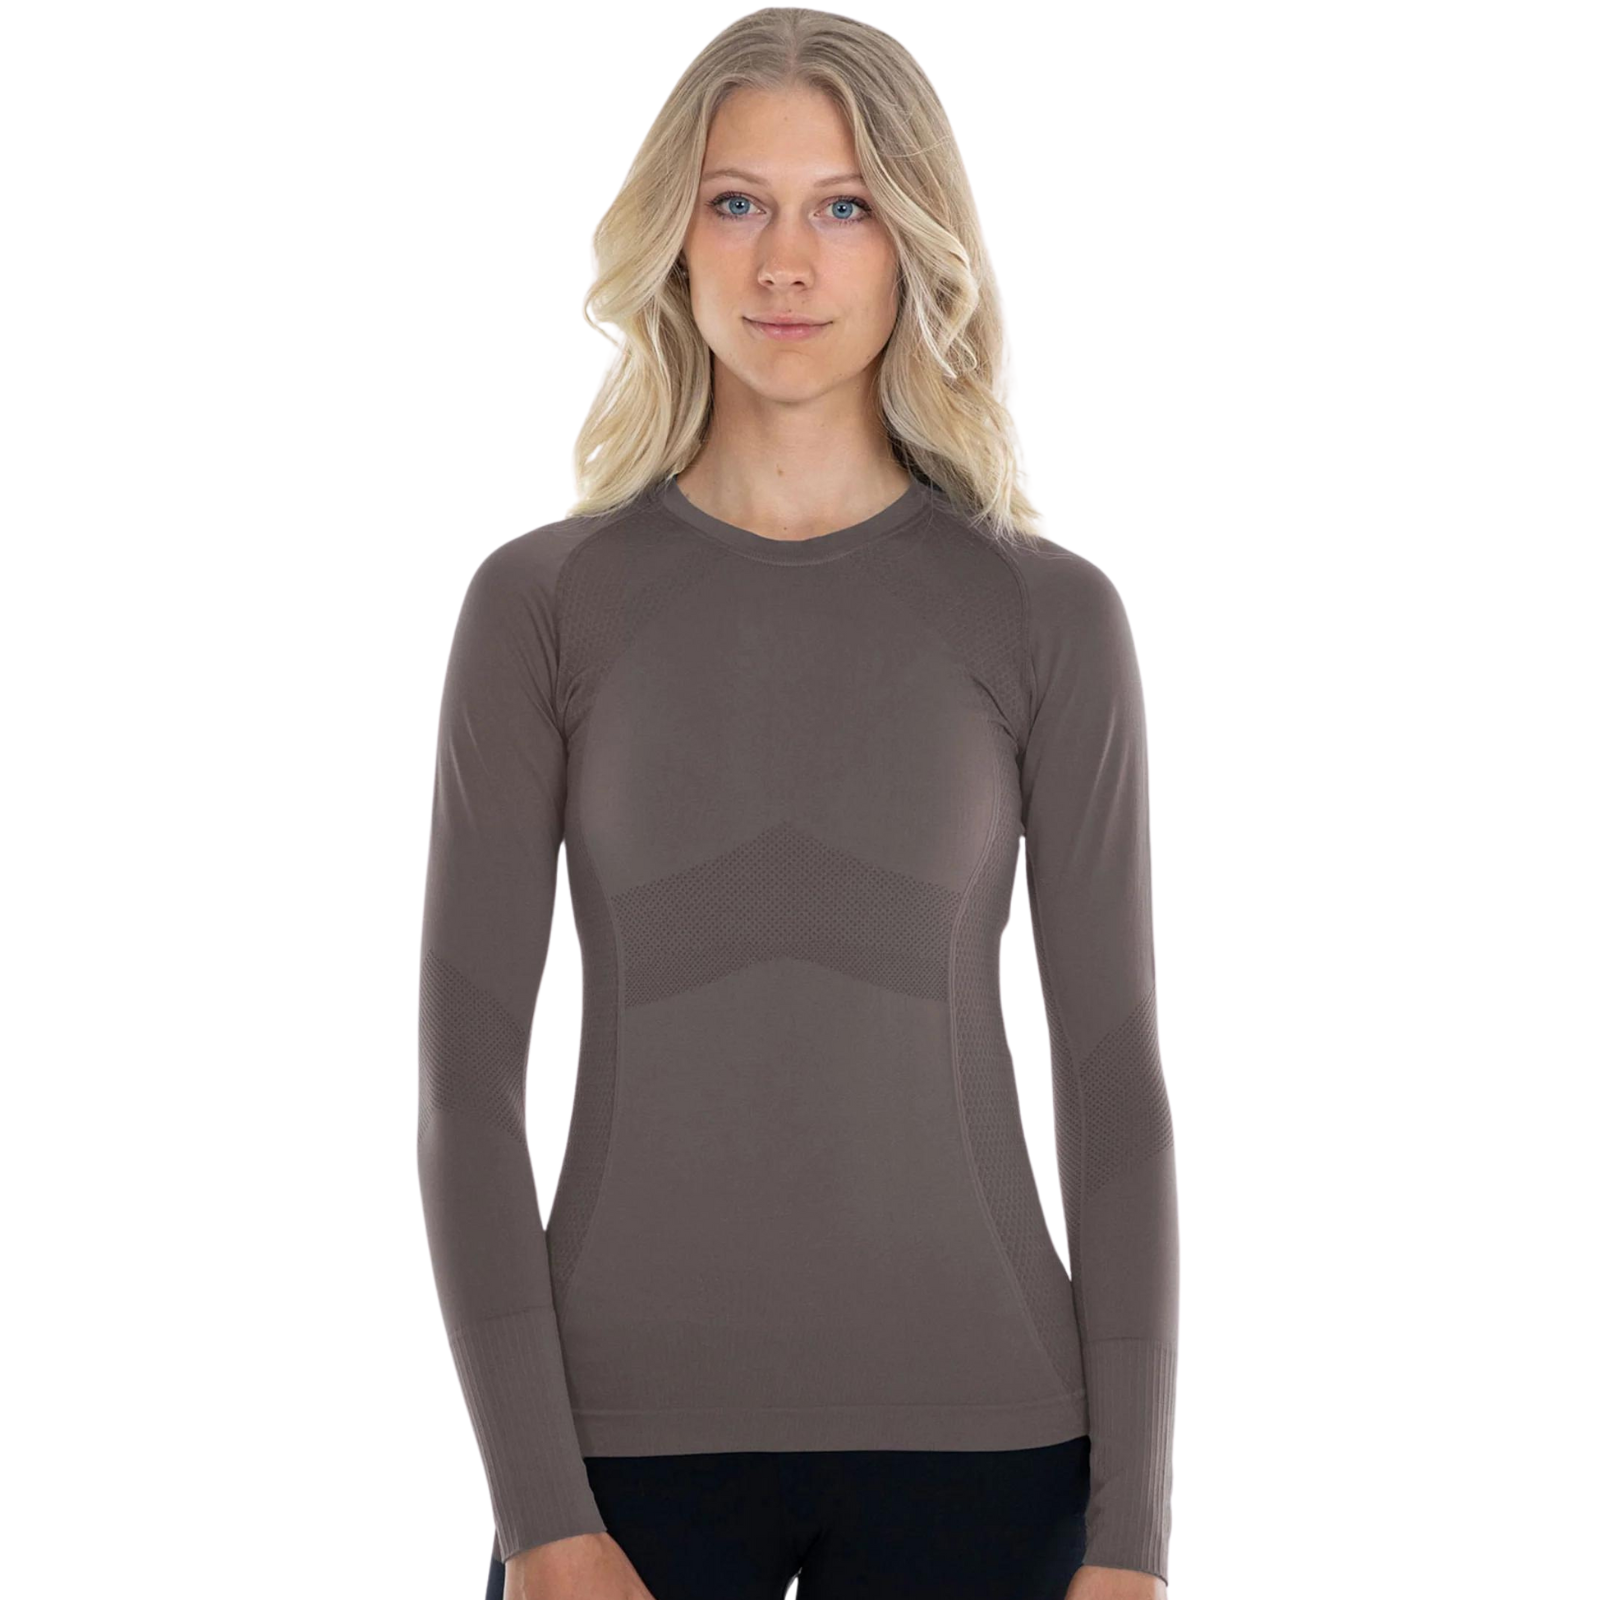 Anique Long Sleeve Crew Shirt in Fossil - Women&#39;s XS (0-2)